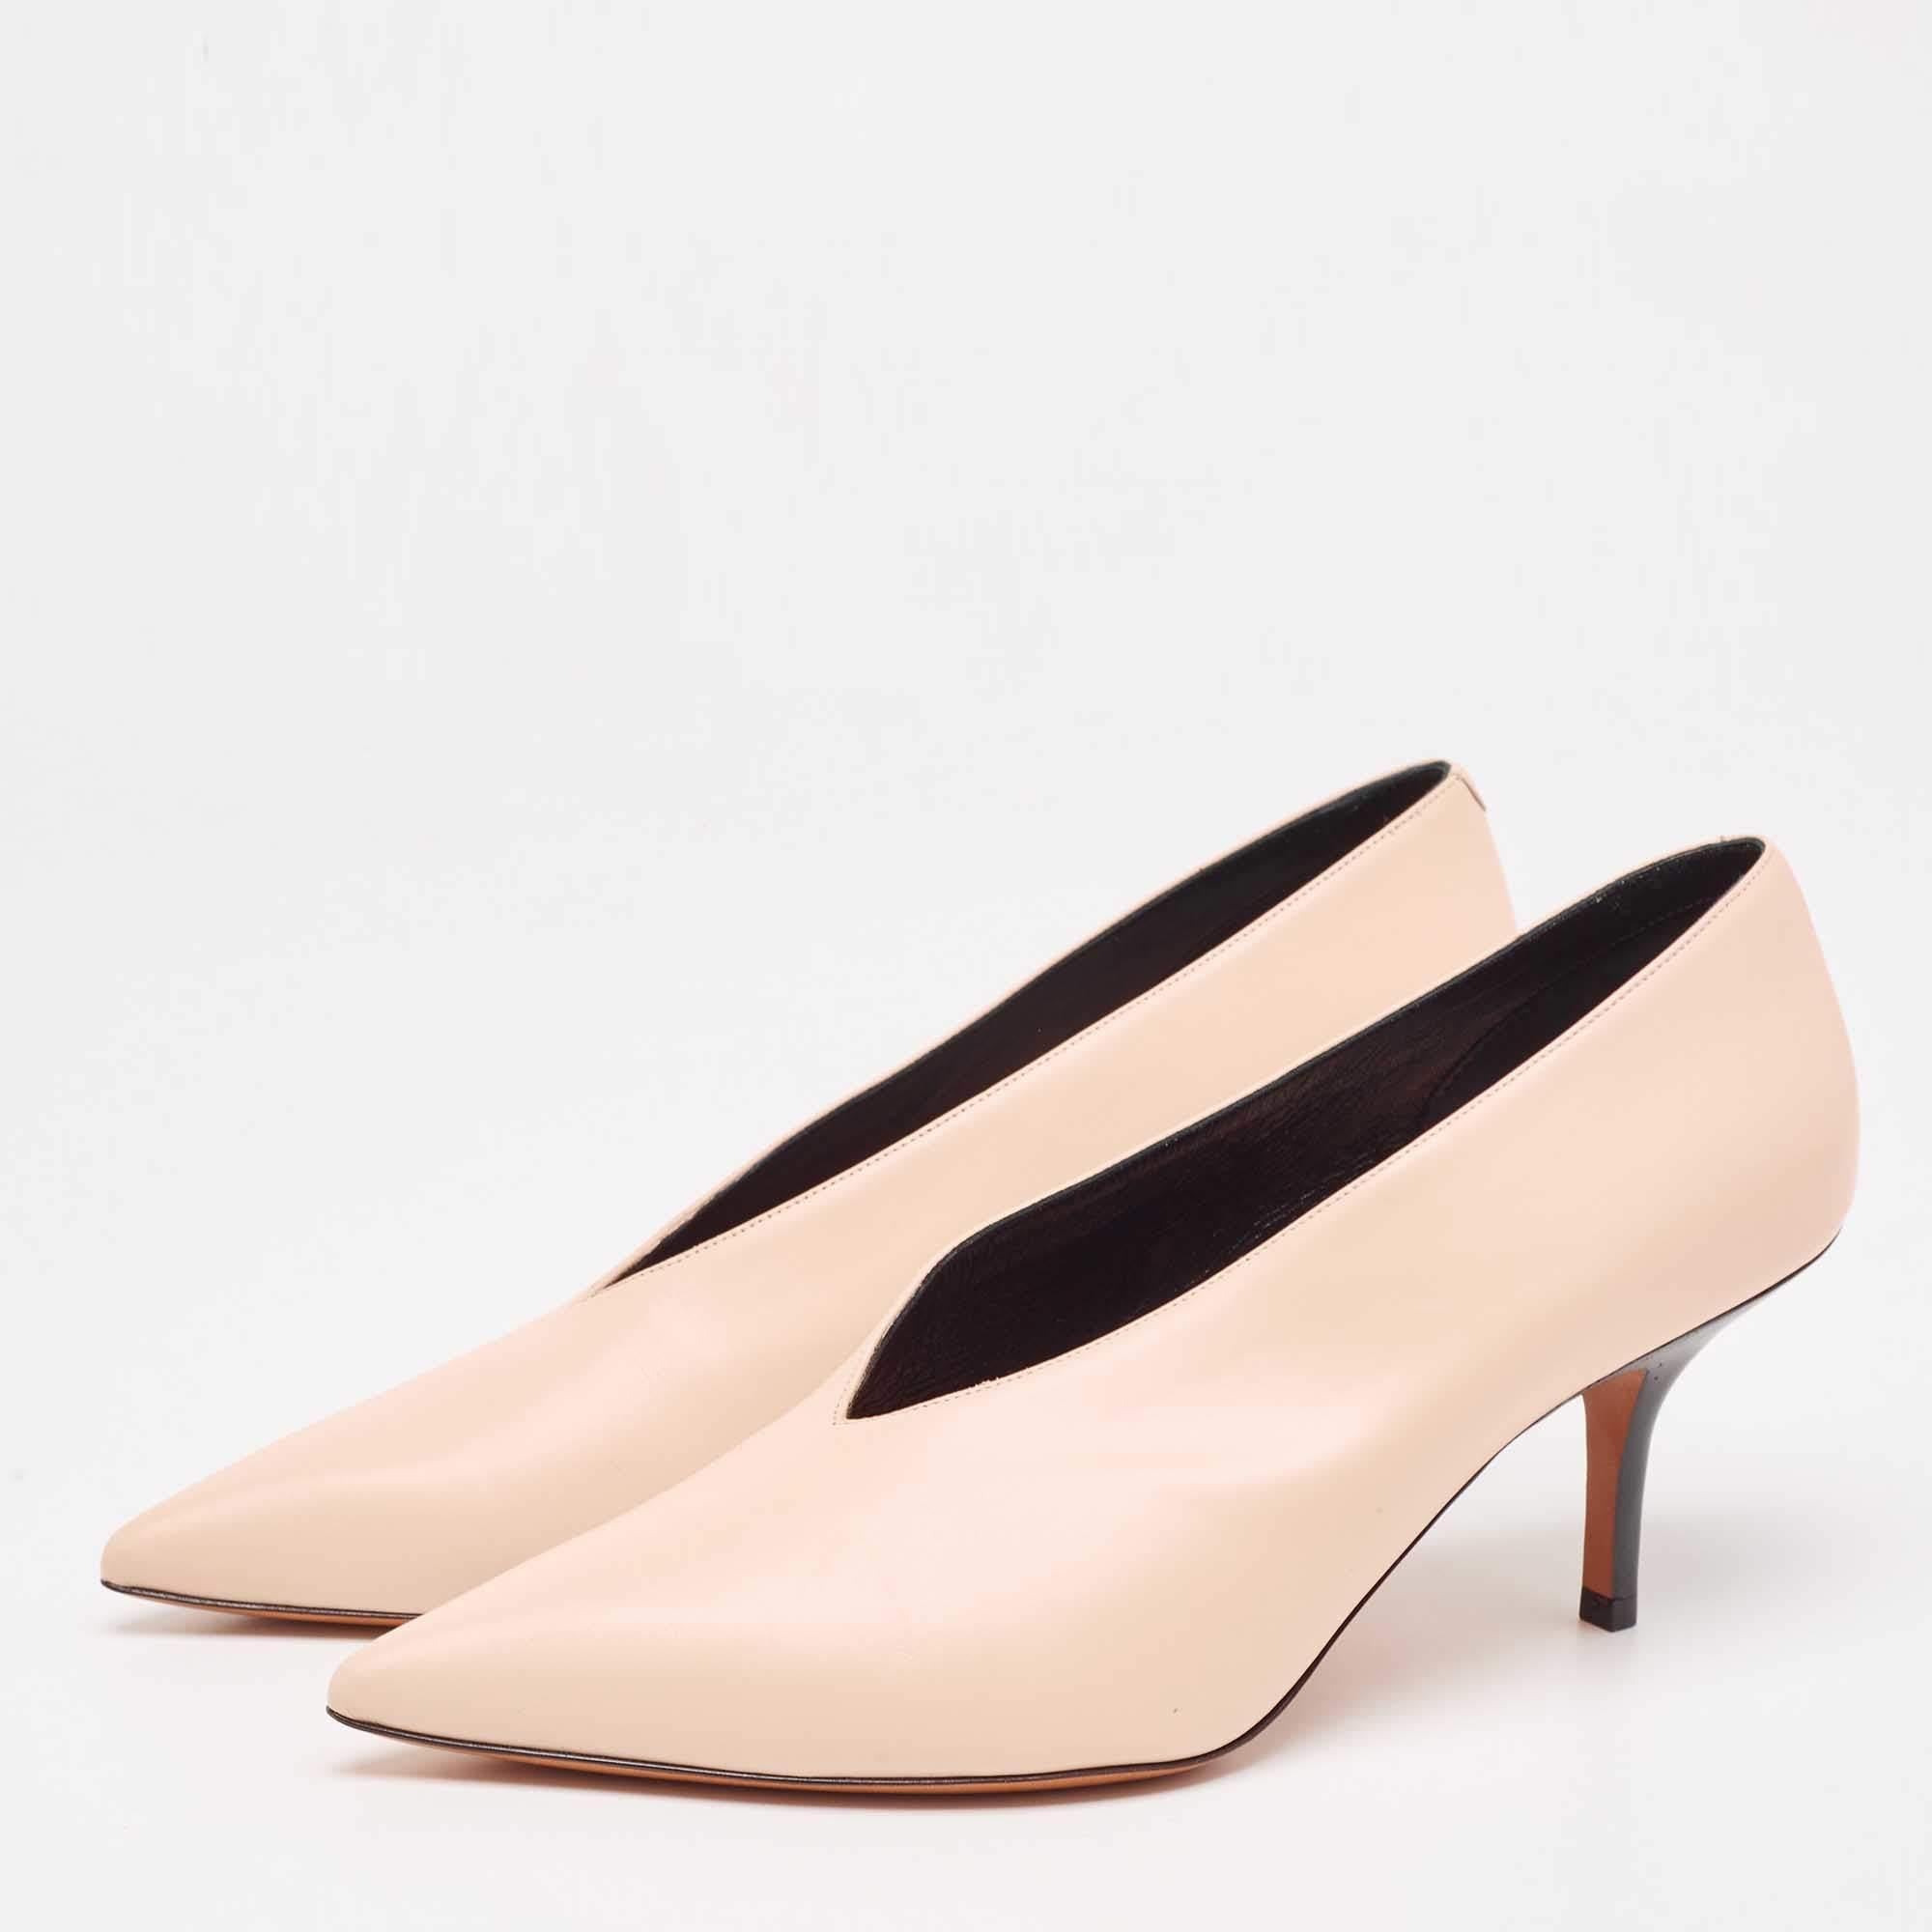 Wonderfully crafted shoes added with notable elements to fit well and pair perfectly with all your plans. Make these Celine pink pumps yours today!

